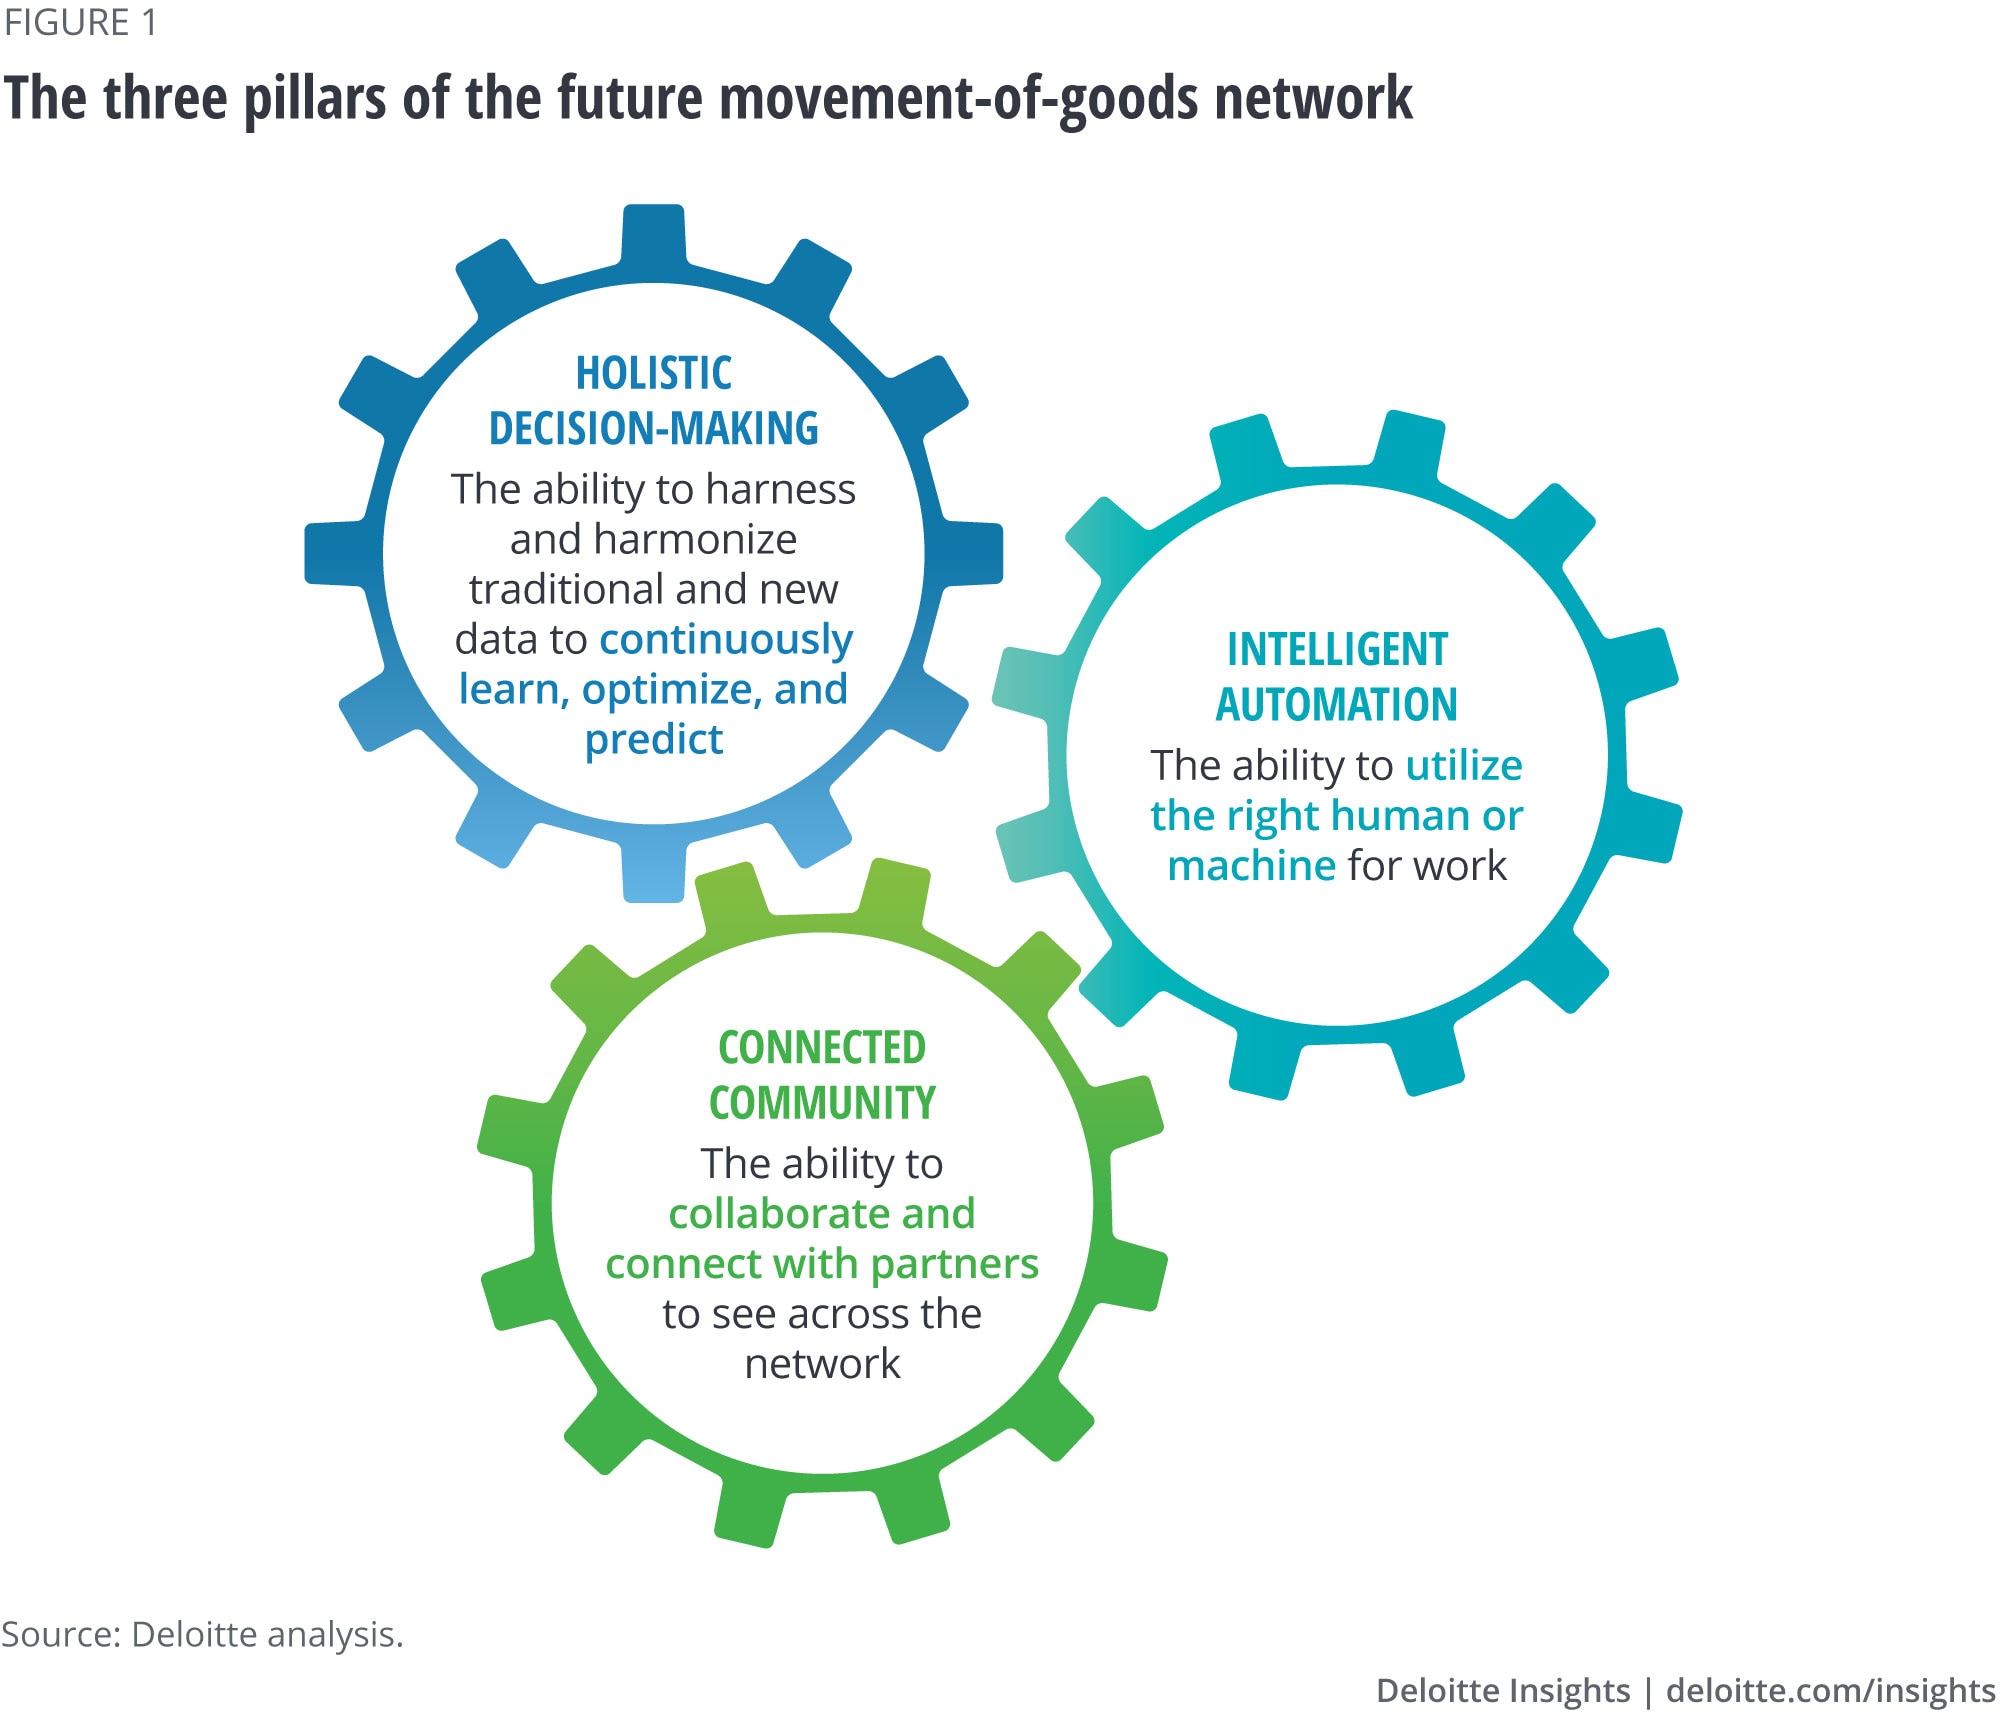 The three pillars of the future movement-of-goods network